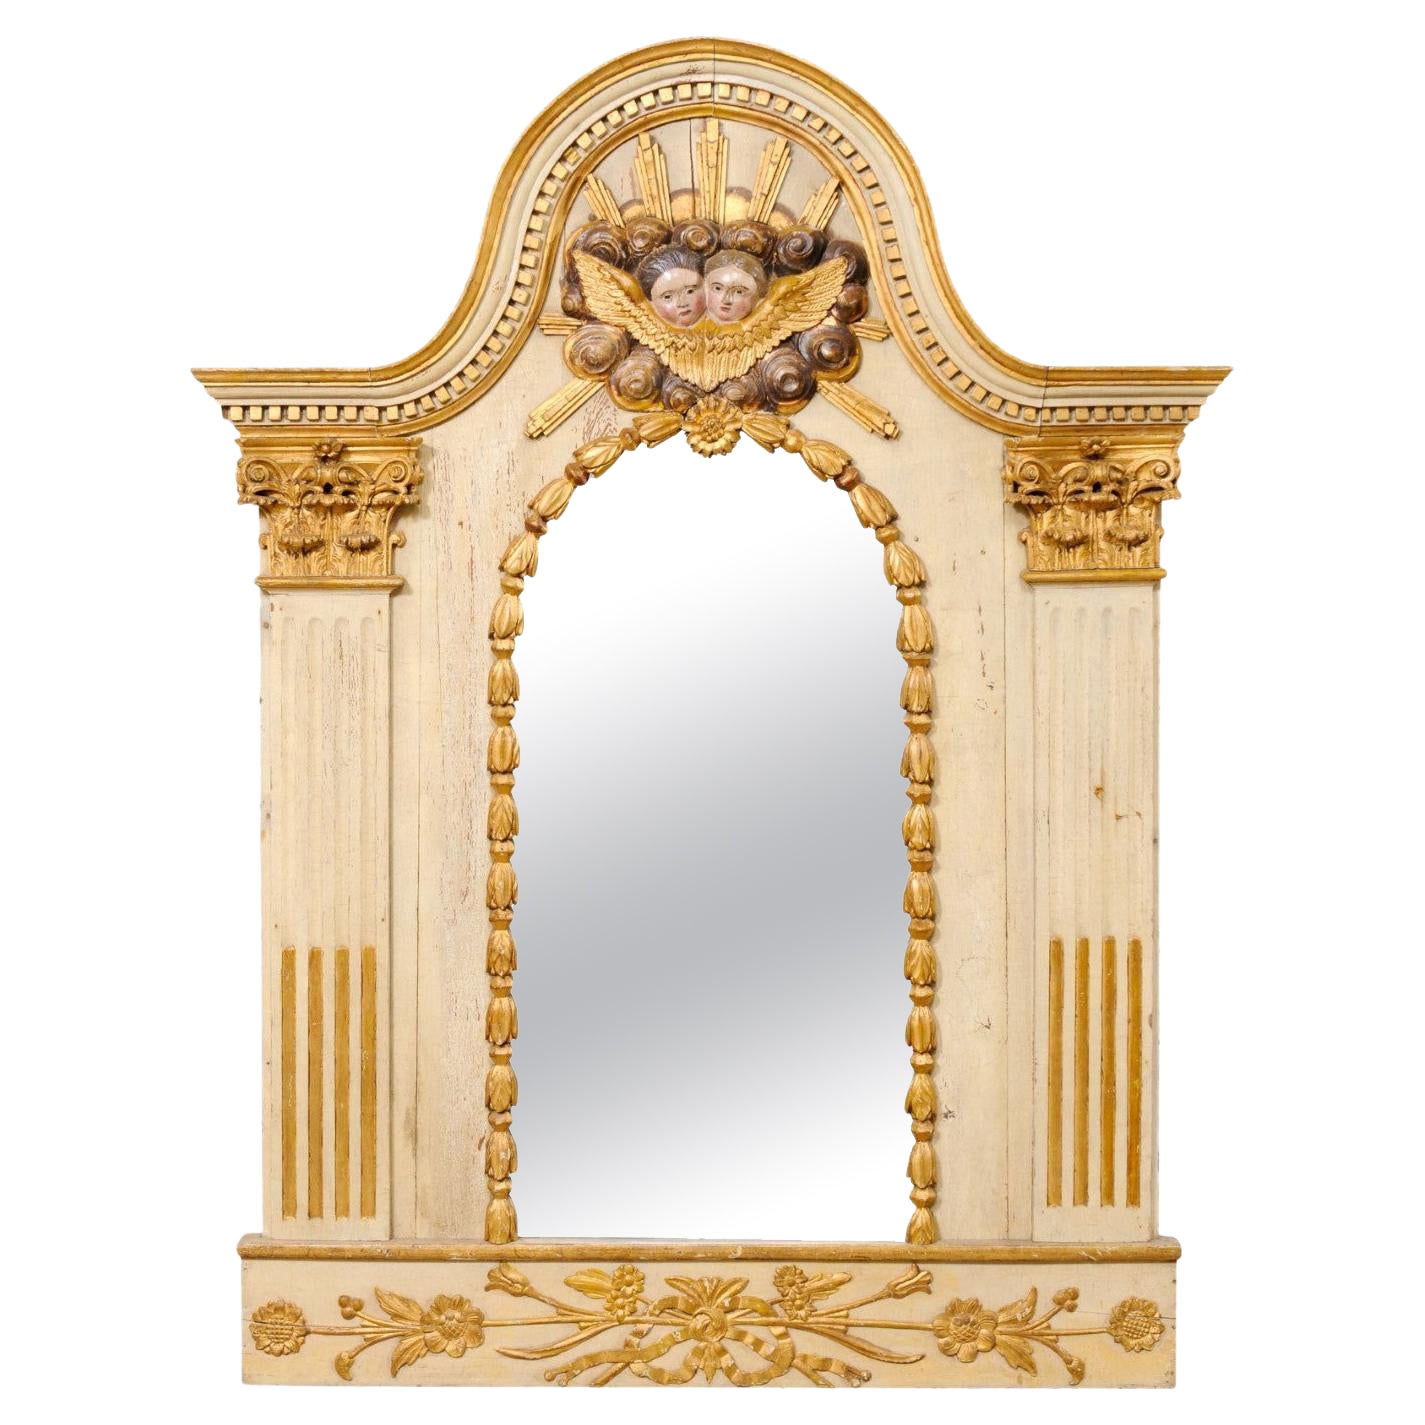 French Late 18th C. Mirror W/Pediment Top, Carved Cloudy-Ray Sunburst W/Cherubs